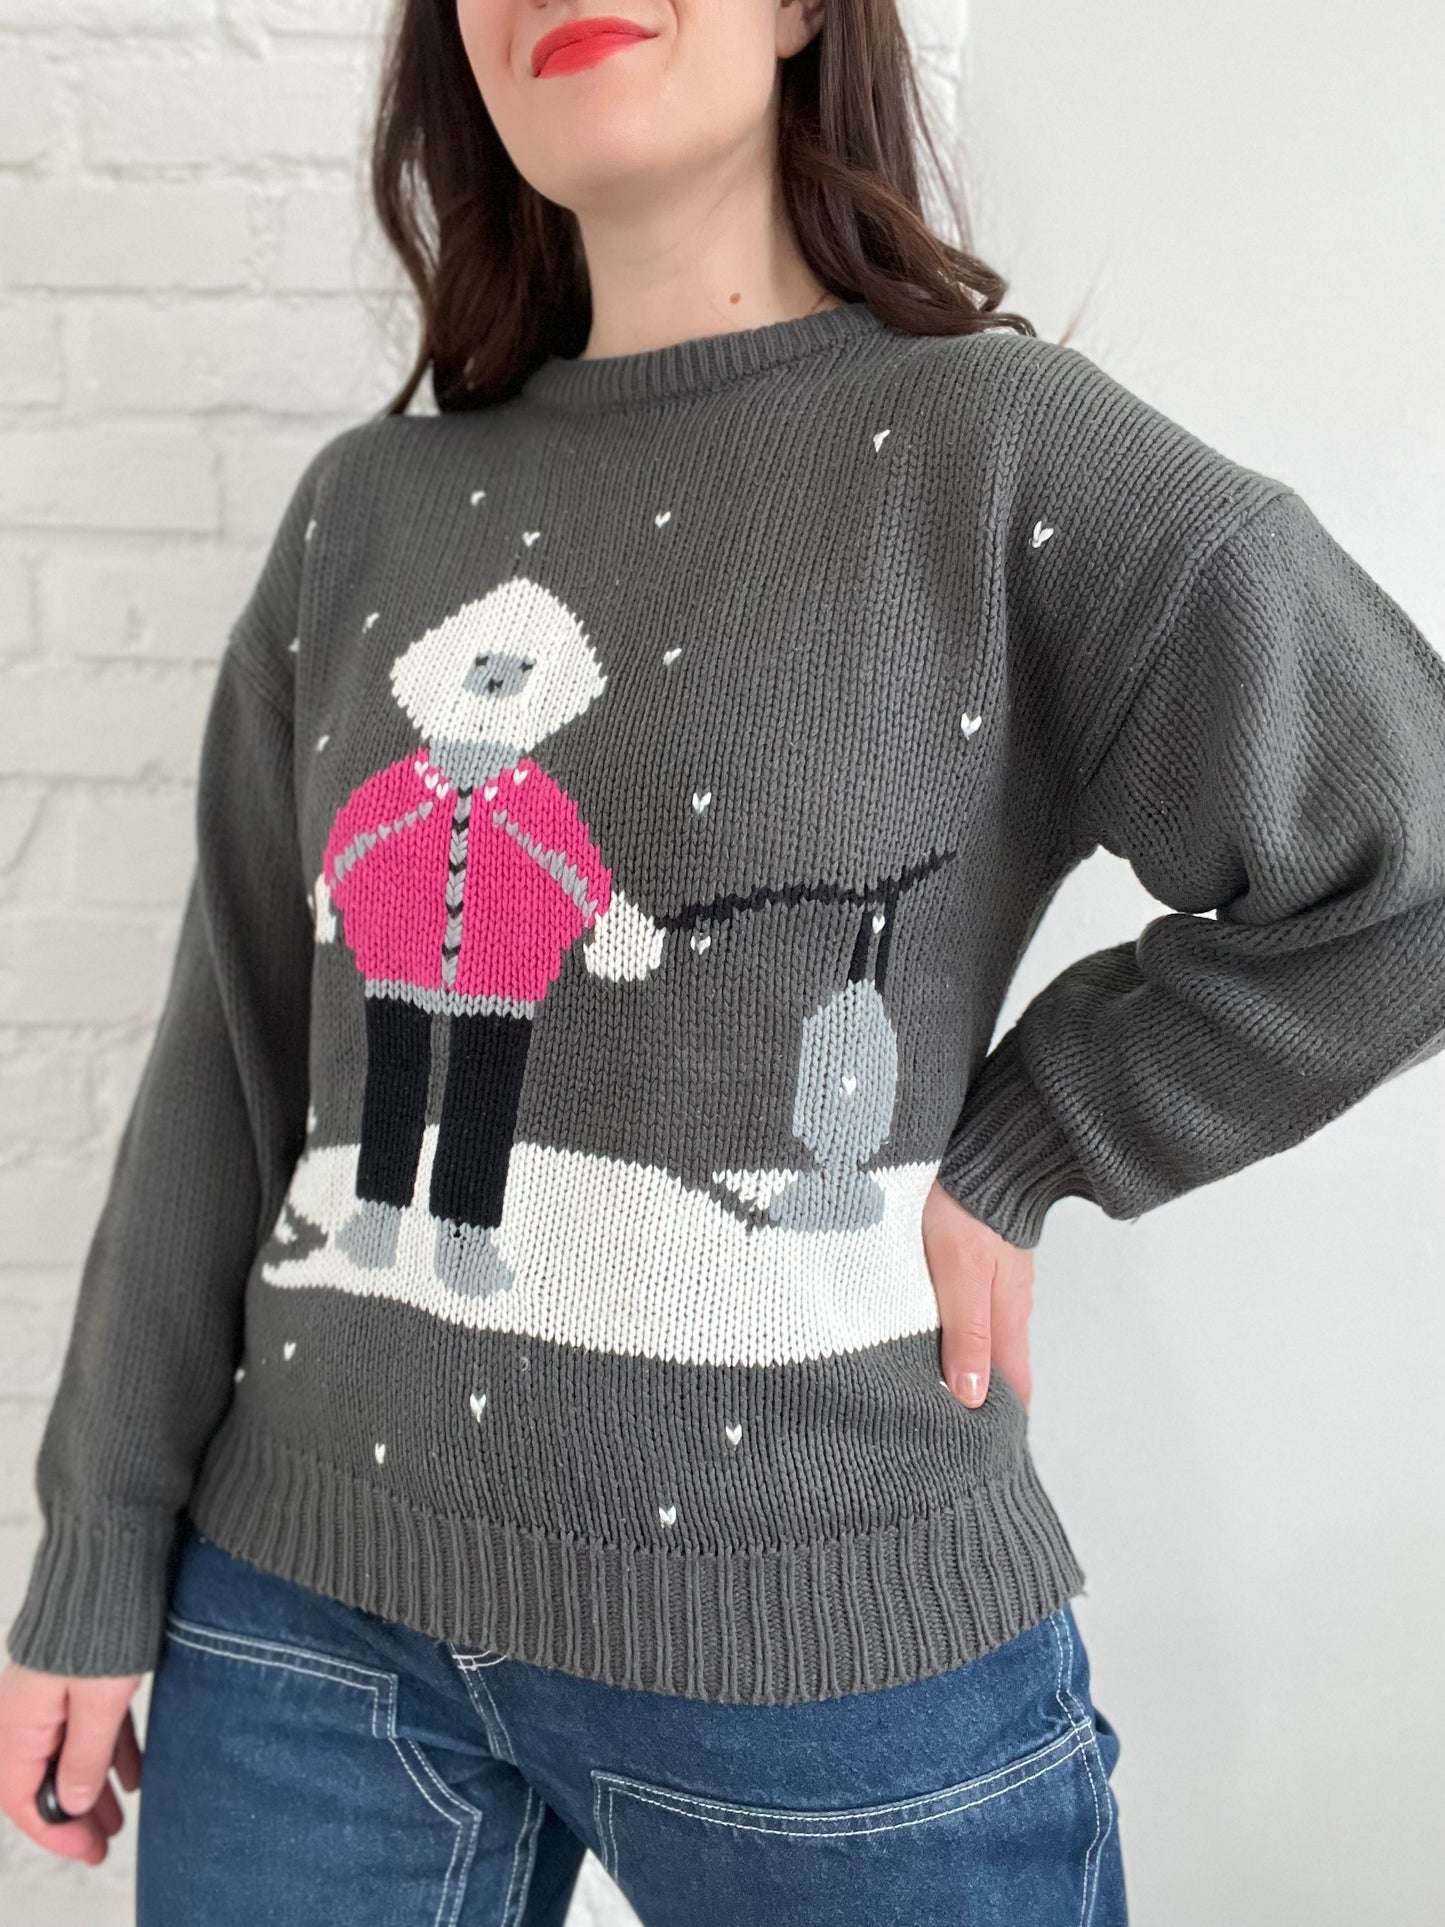 Vintage Ice Fishing Knit Sweater - L